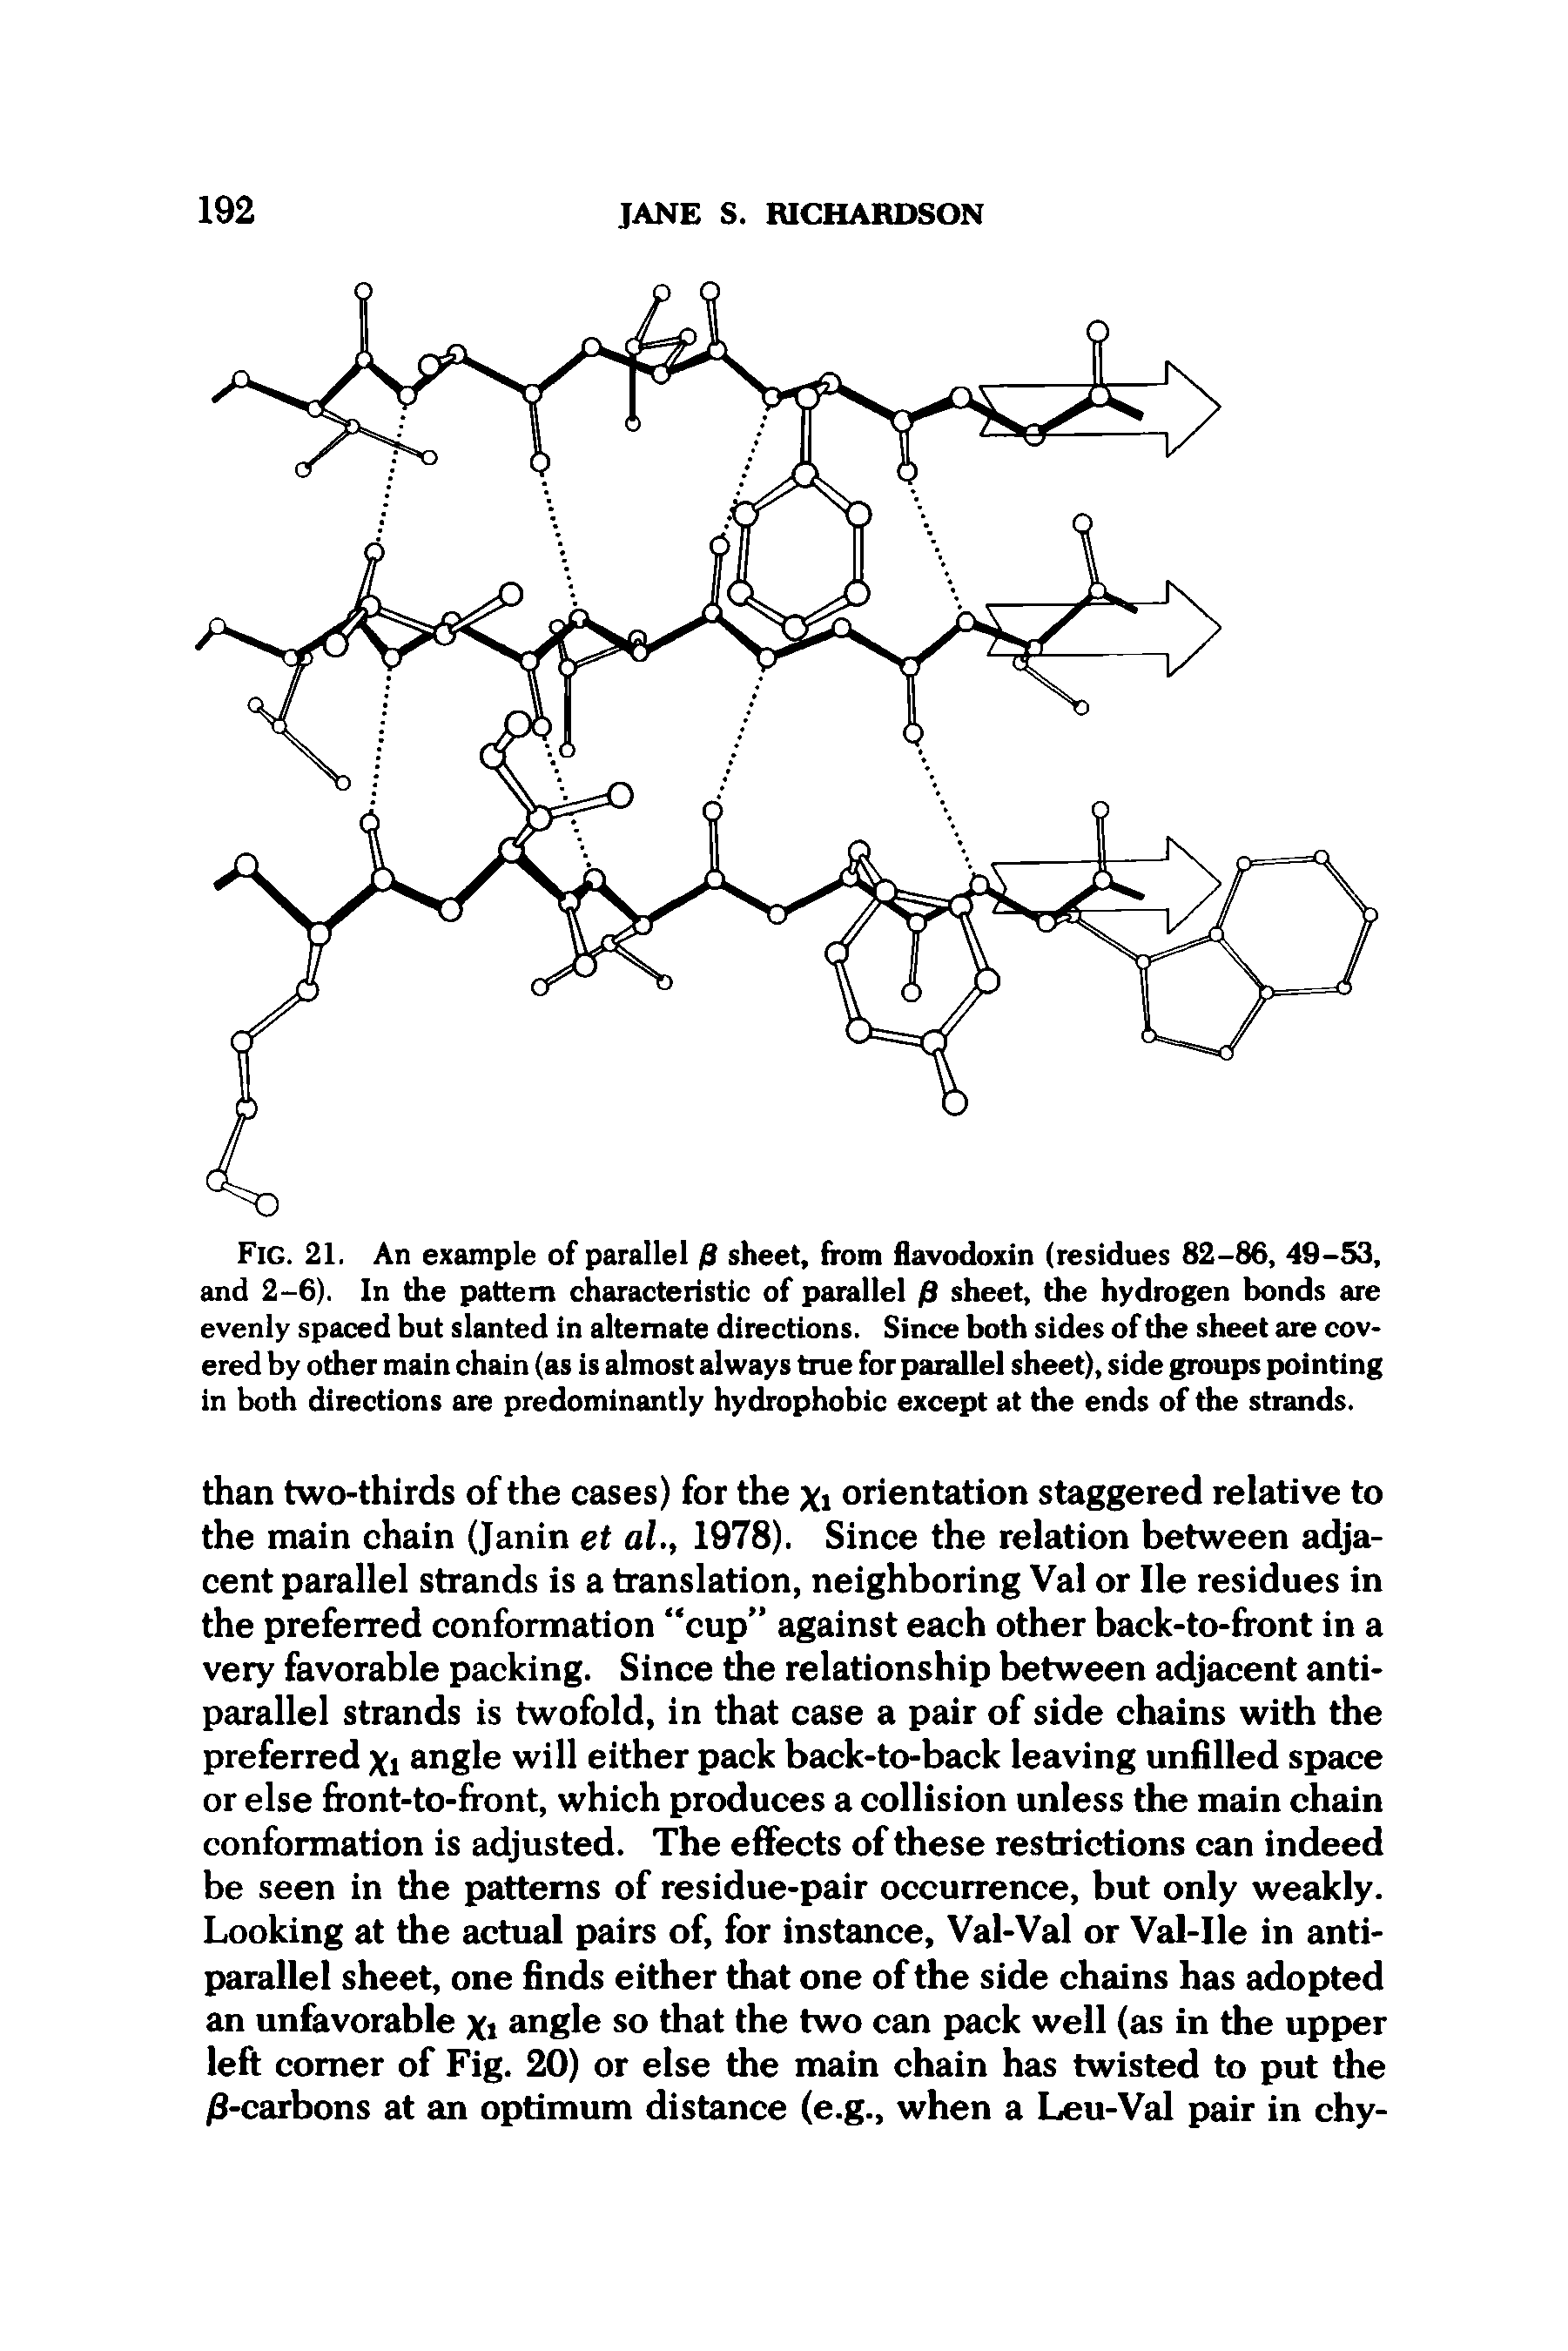 Fig. 21. An example of parallel /9 sheet, from flavodoxin (residues 82-86, 49-53, and 2-6). In the pattern characteristic of parallel j9 sheet, the hydrogen bonds are evenly spaced but slanted in alternate directions. Since both sides of the sheet are covered by other main chain (as is almost always true for parallel sheet), side groups pointing in both directions are predominantly hydrophobic except at the ends of the strands.